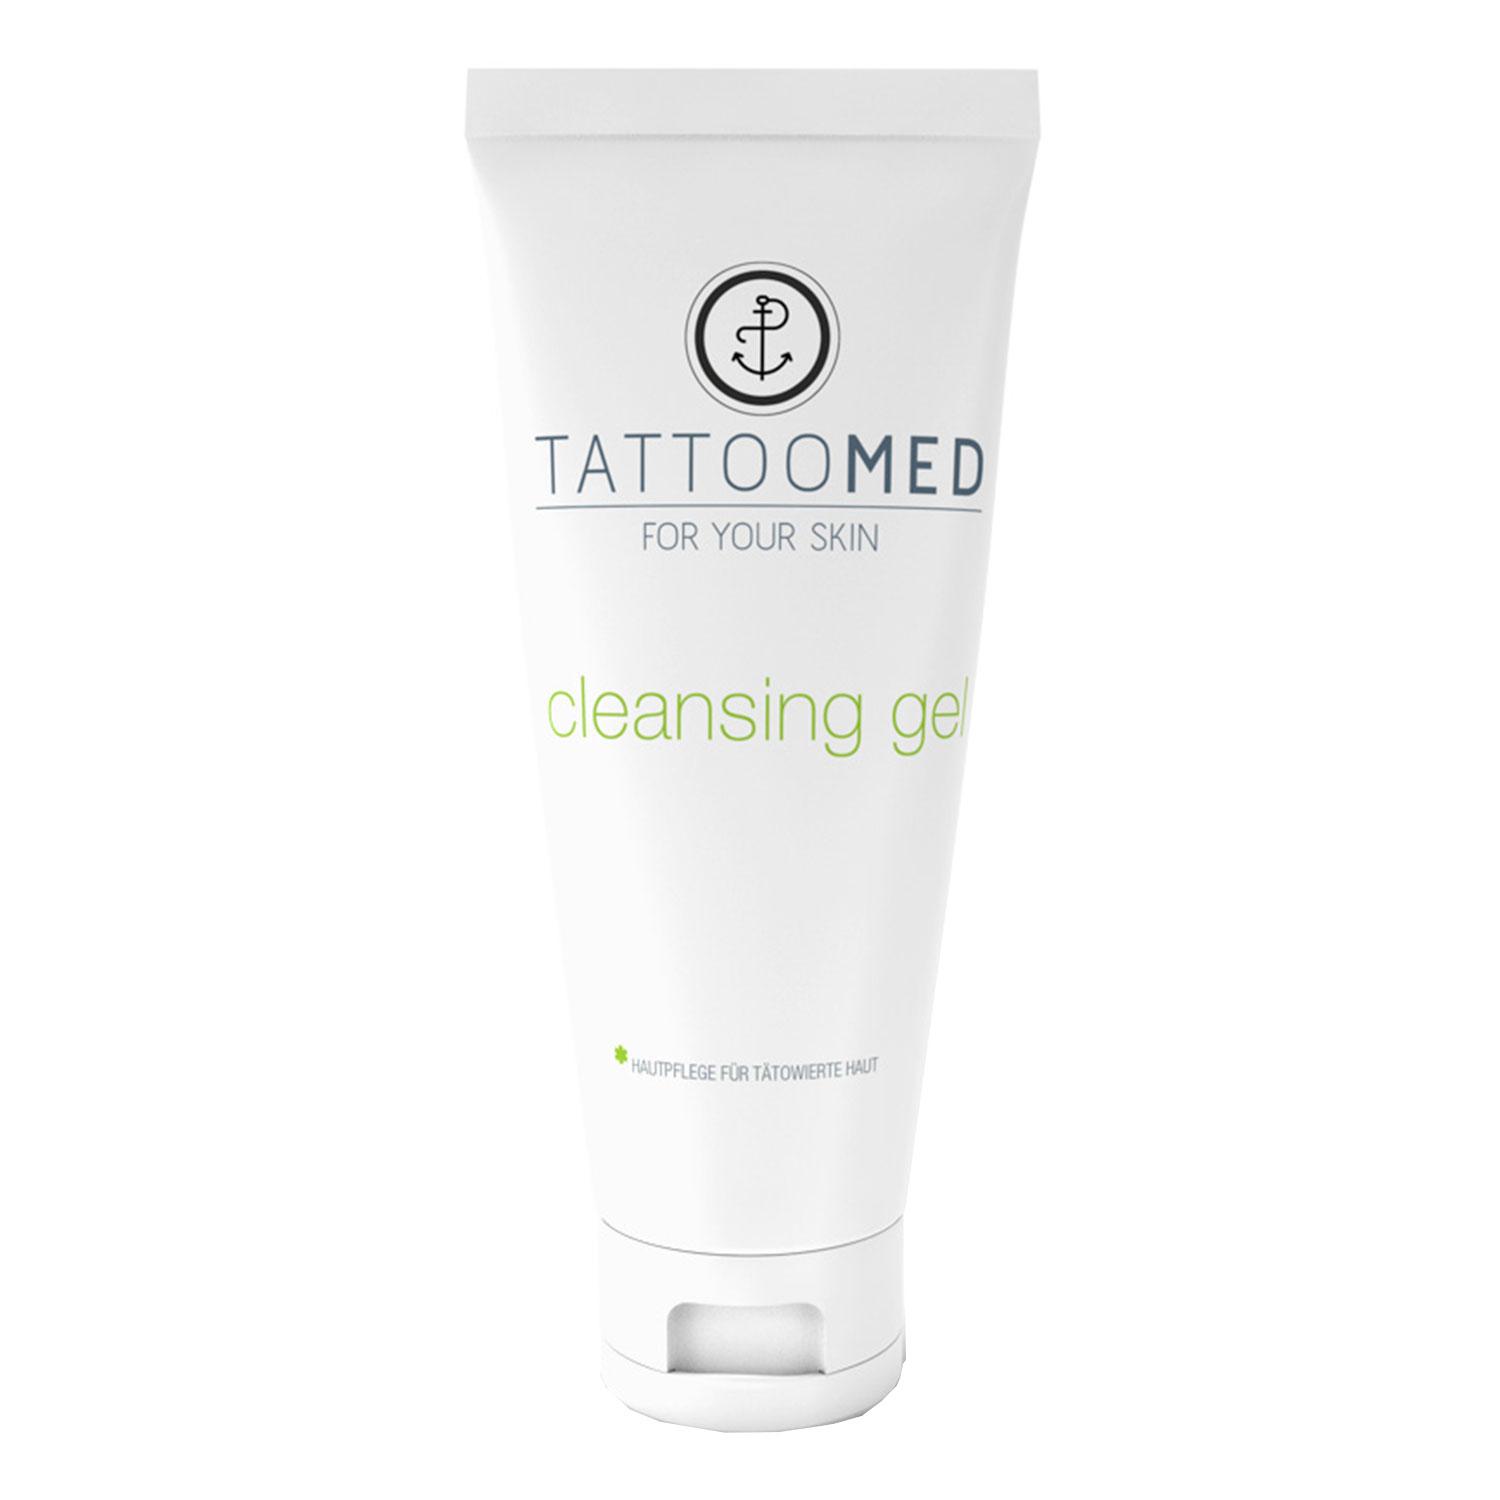 TattooMed Care - Cleansing Gel